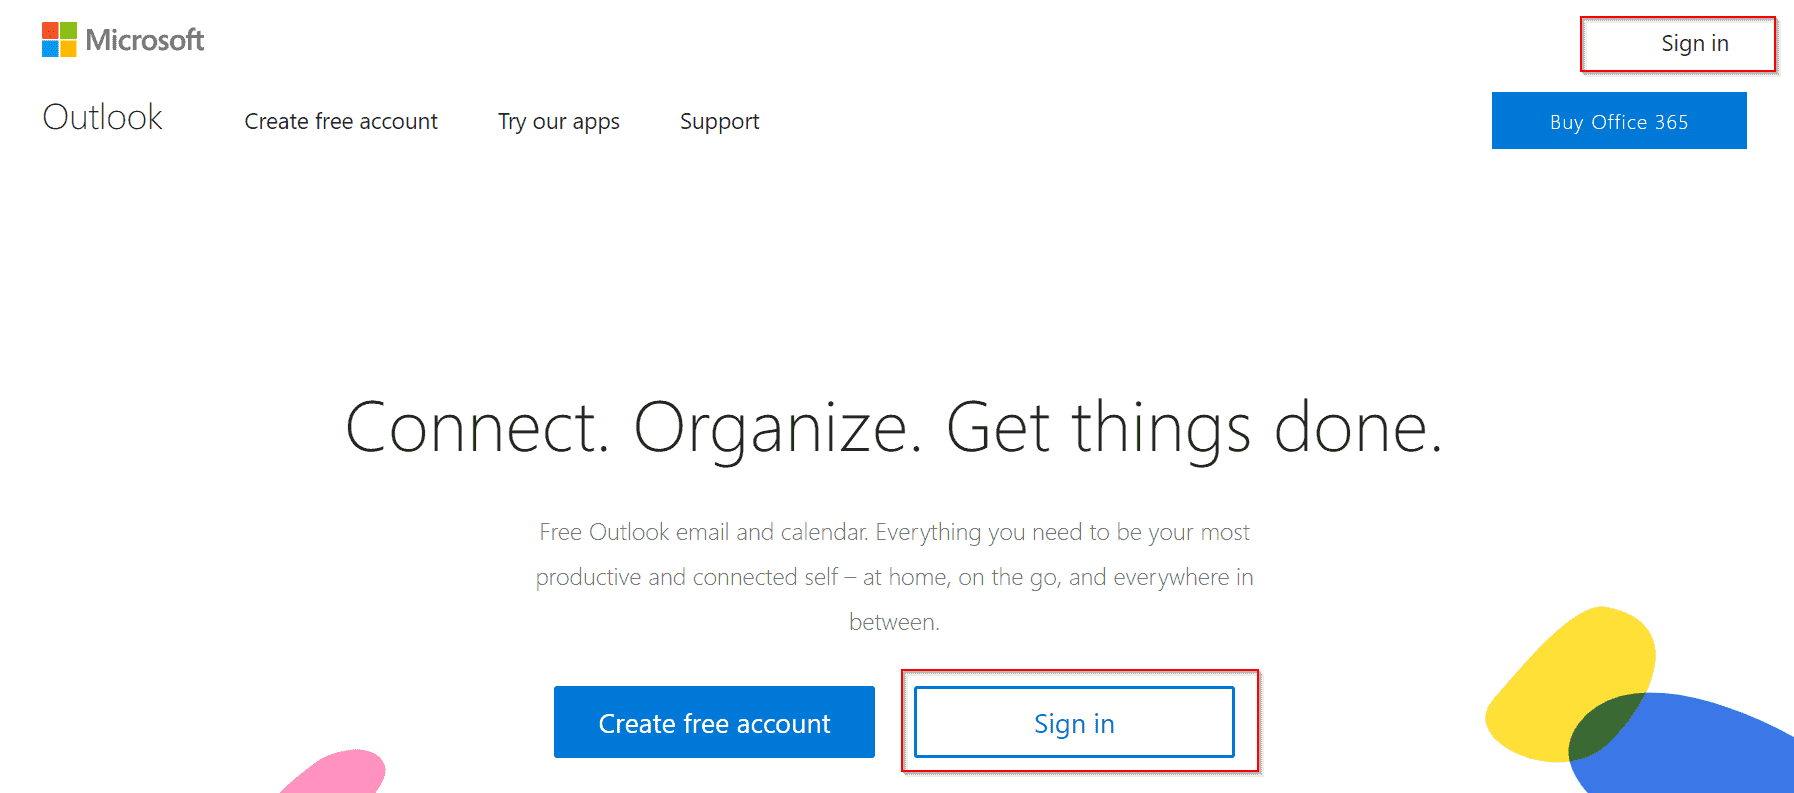 sign-in-to-outlook.com-email | Itechguides.com